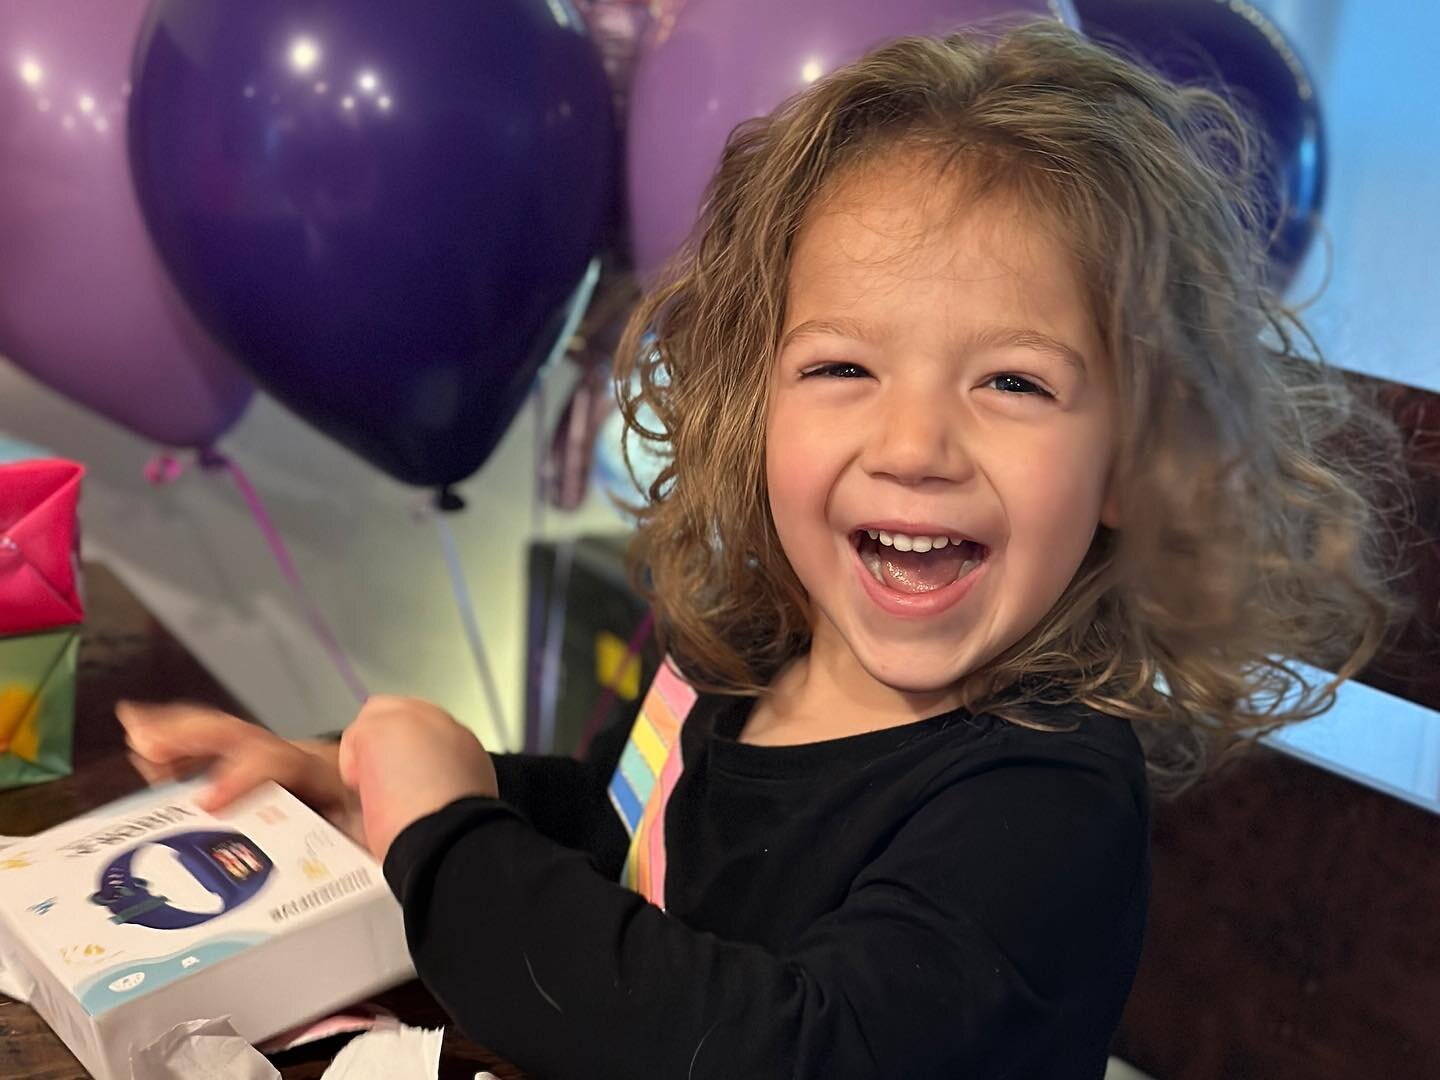 My little girl turns 4 today and my heart is full and my stomach in knots. Scrolling through all these pictures and videos and I see so much love and happiness in your eyes - my little warrior. You&rsquo;re a light in everyone&rsquo;s world. You&rsqu